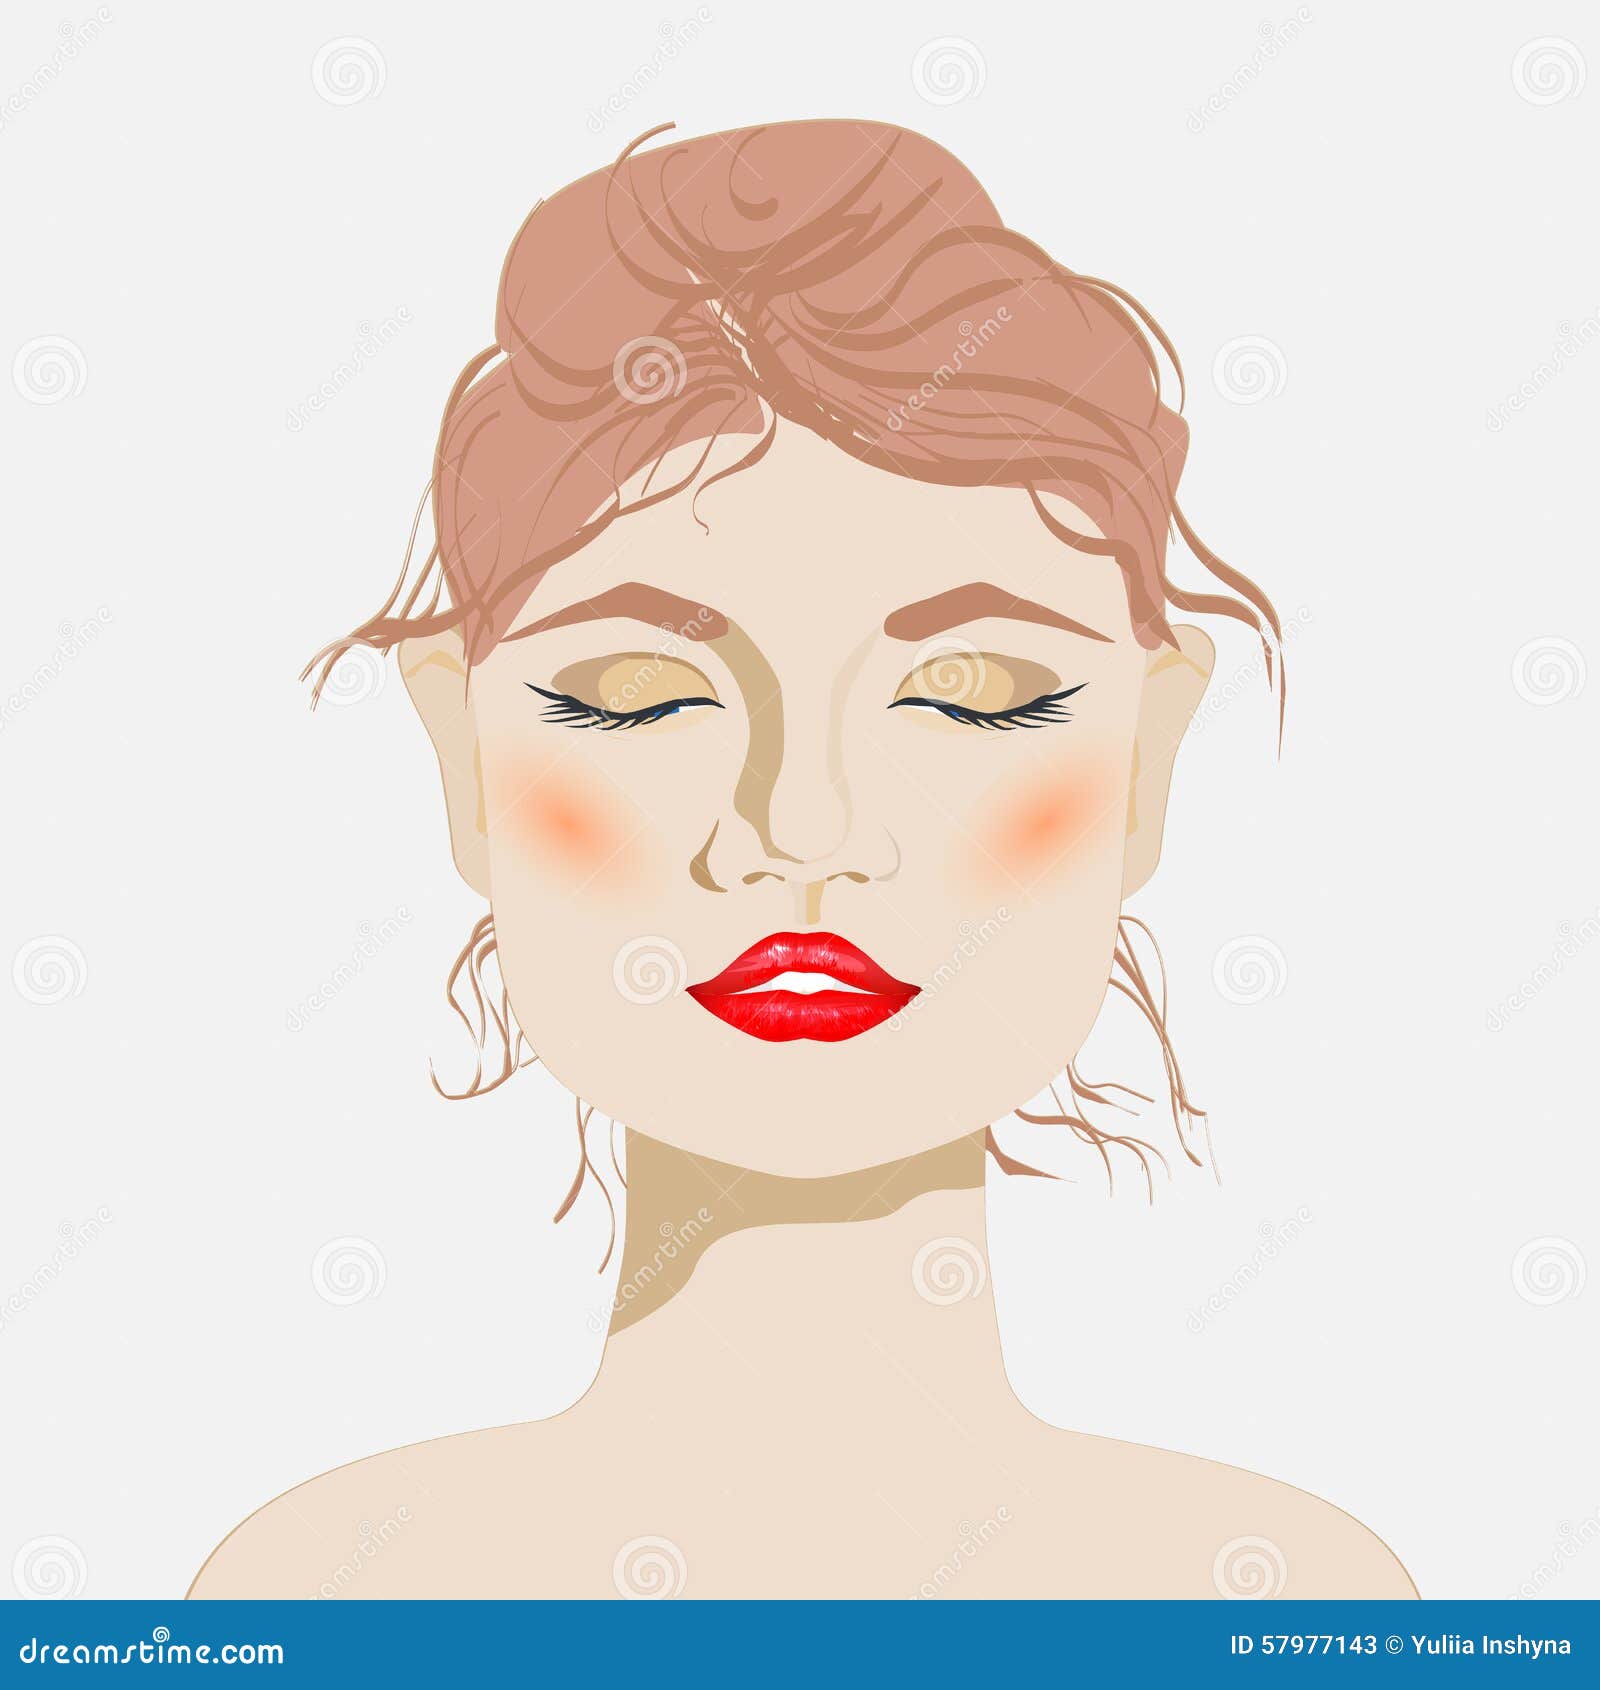 Young woman with red lips stock vector. Illustration of drawn - 57977143